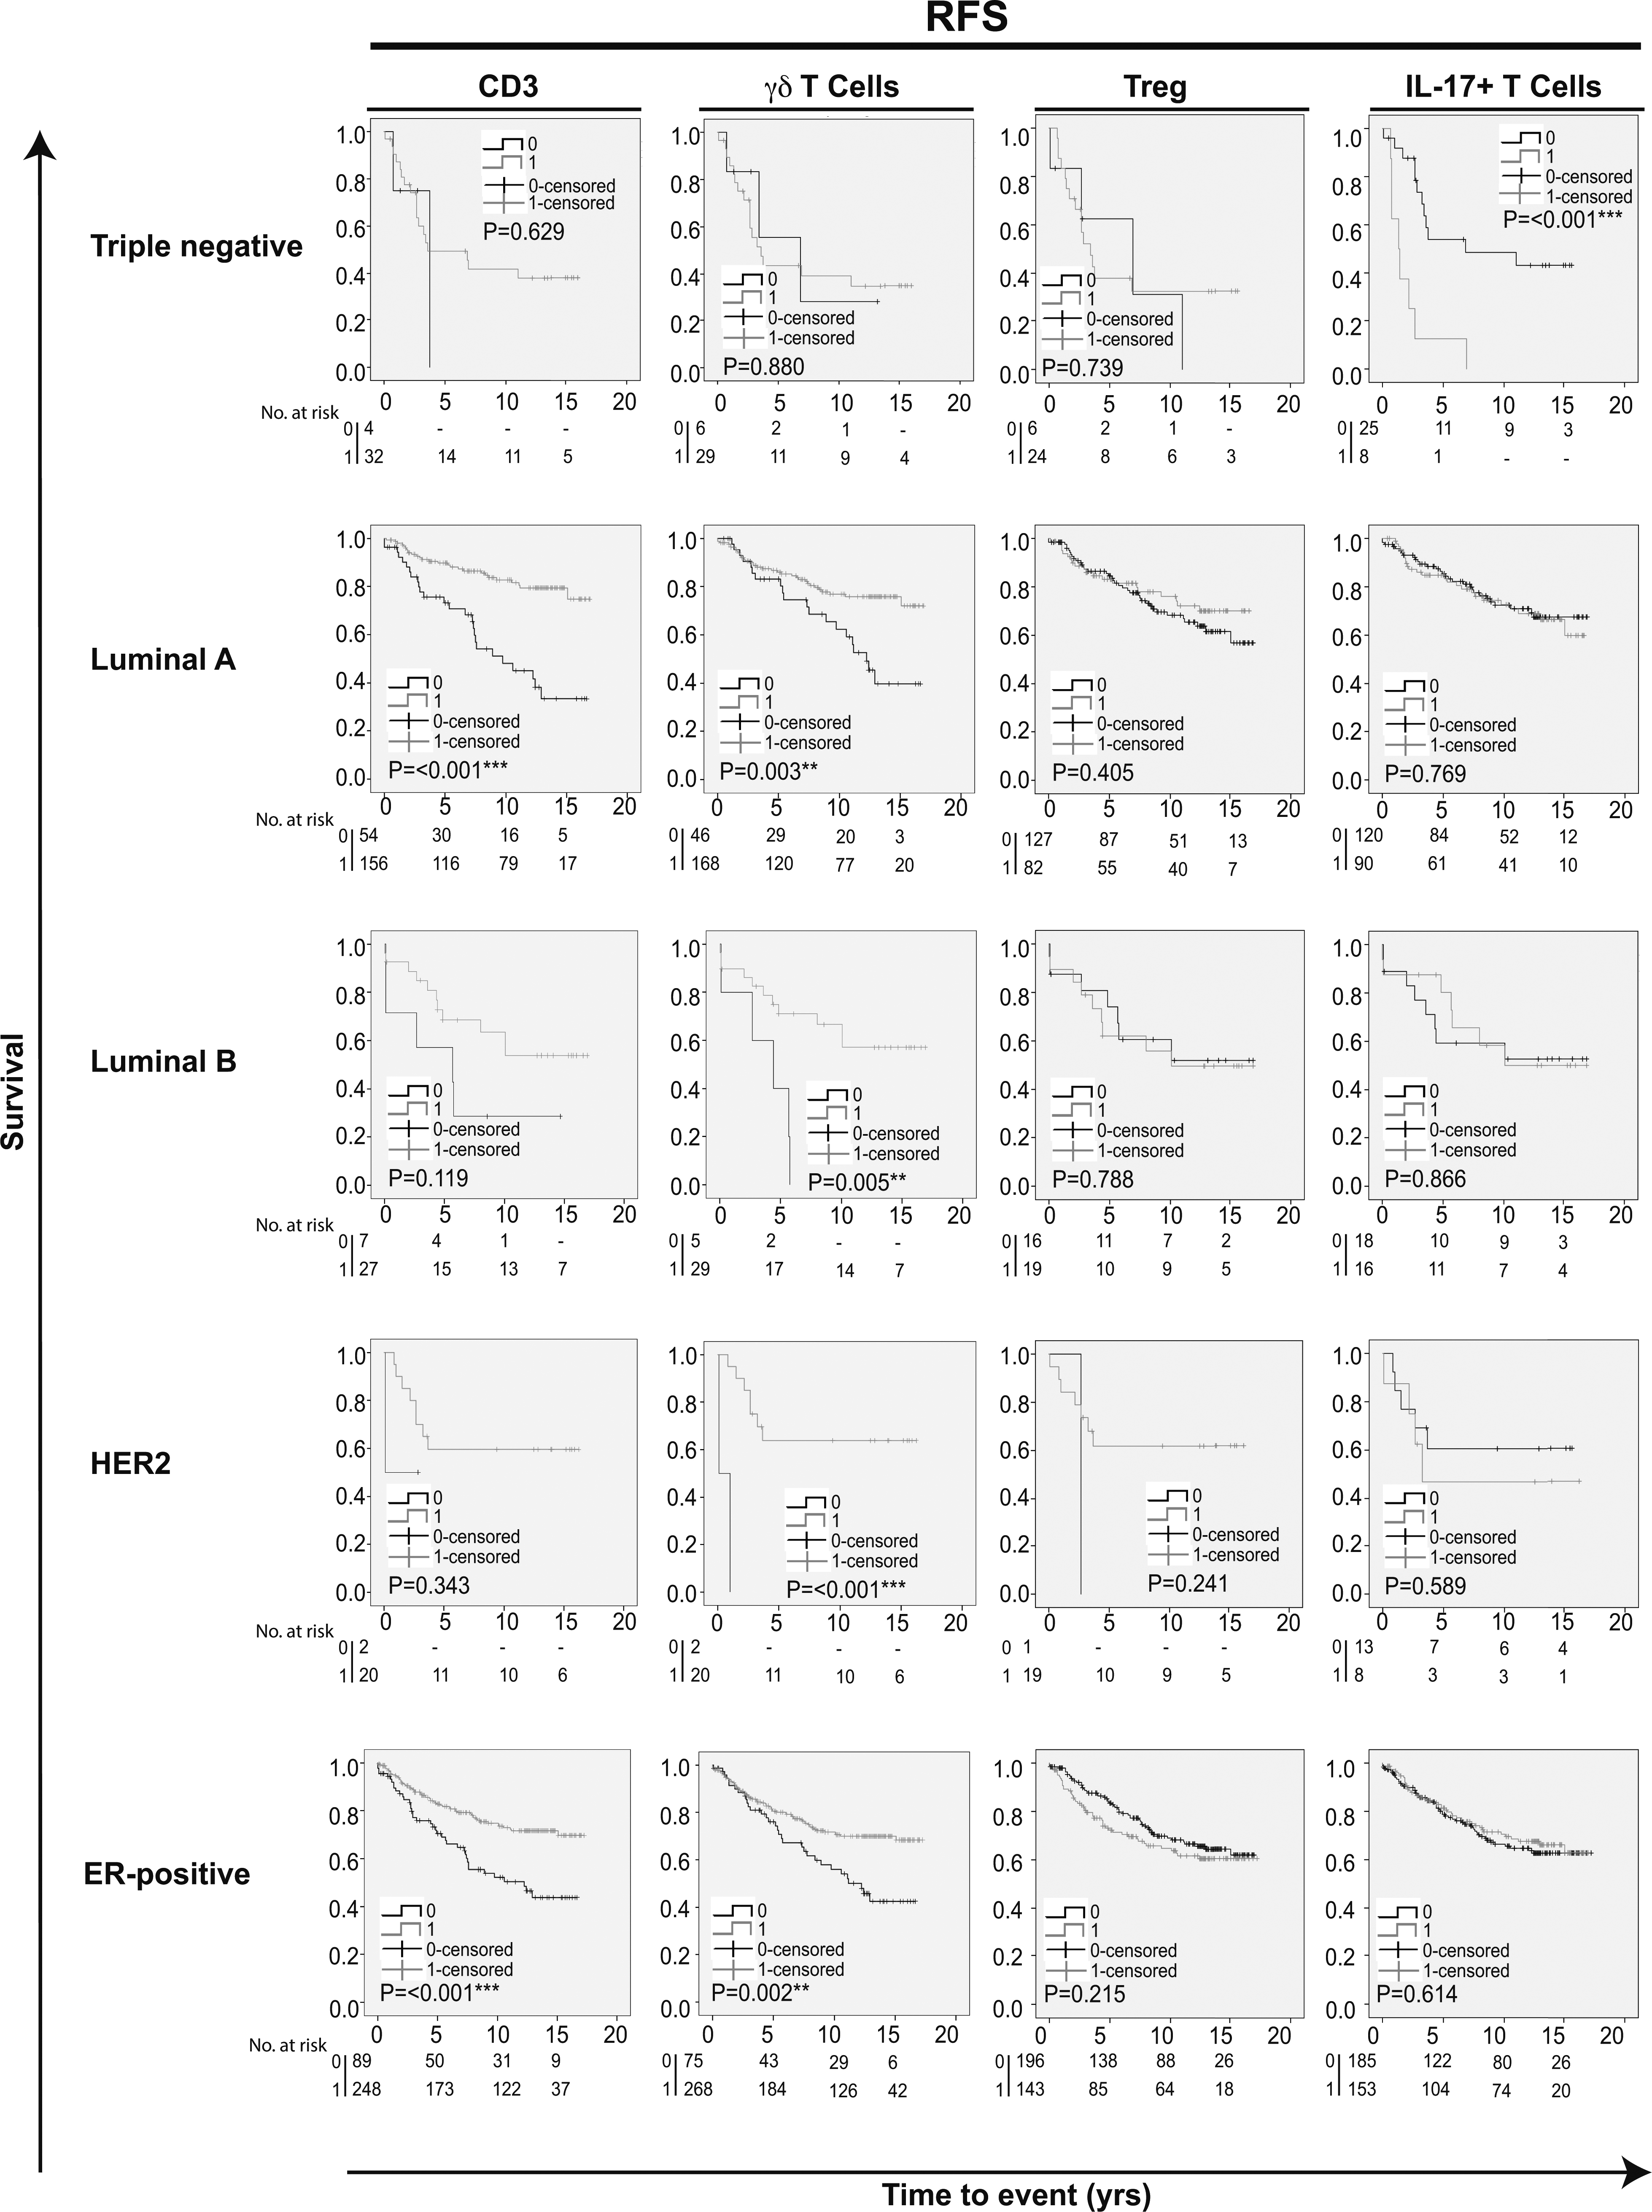 Kaplan-Meier estimates of recurrence free survival according to different infiltrating T cell subpopulations in breast cancer. Impact of pan-T cell CD3, γ⁢δ T cells, Tregs and IL-17+ T cells on RFS in different breast cancer subtypes. Log-rank Pvalue < 0.05 was considered significant.